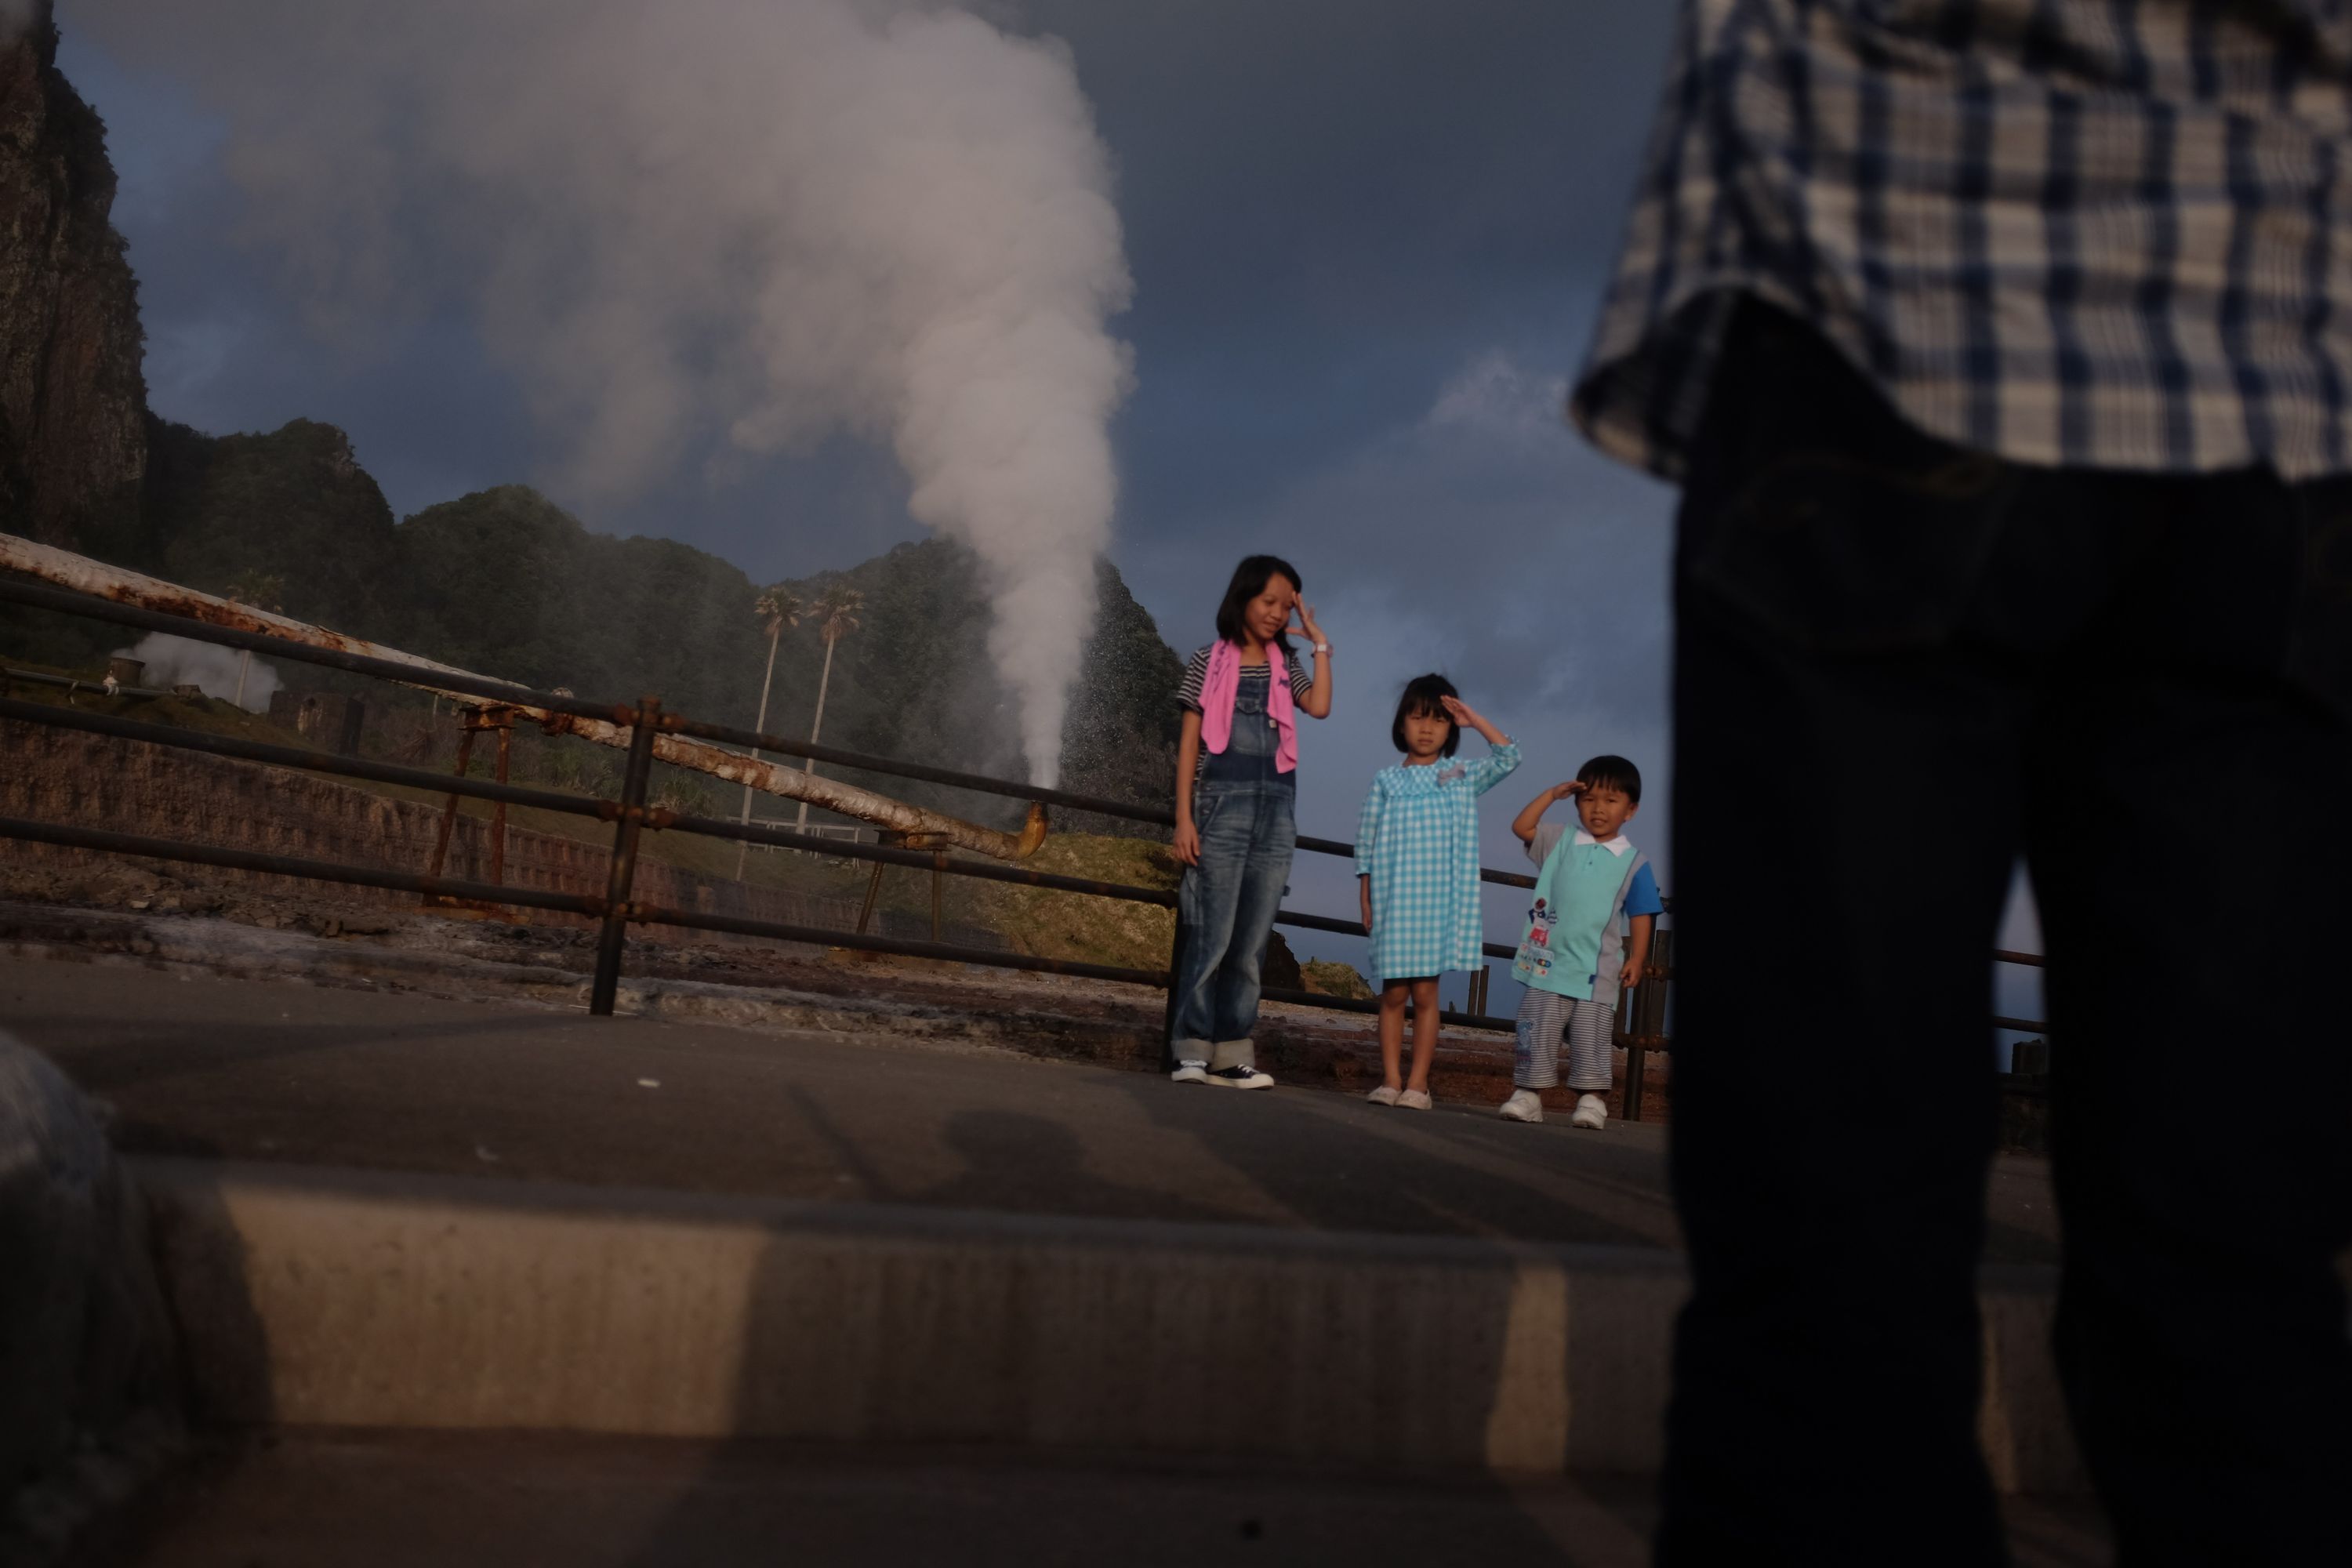 Children pose in front of a small geyser of hot water.